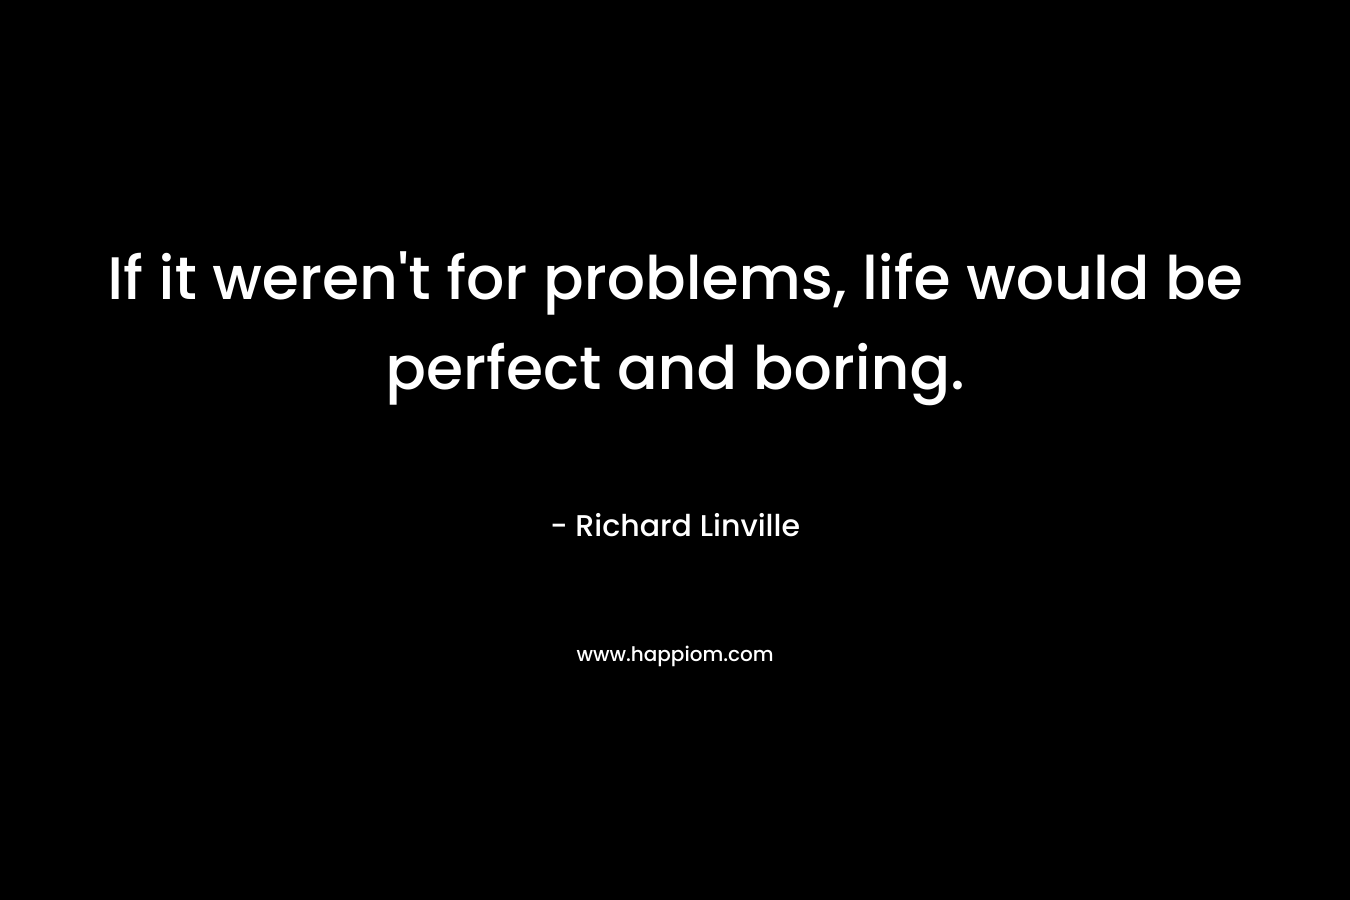 If it weren’t for problems, life would be perfect and boring. – Richard Linville